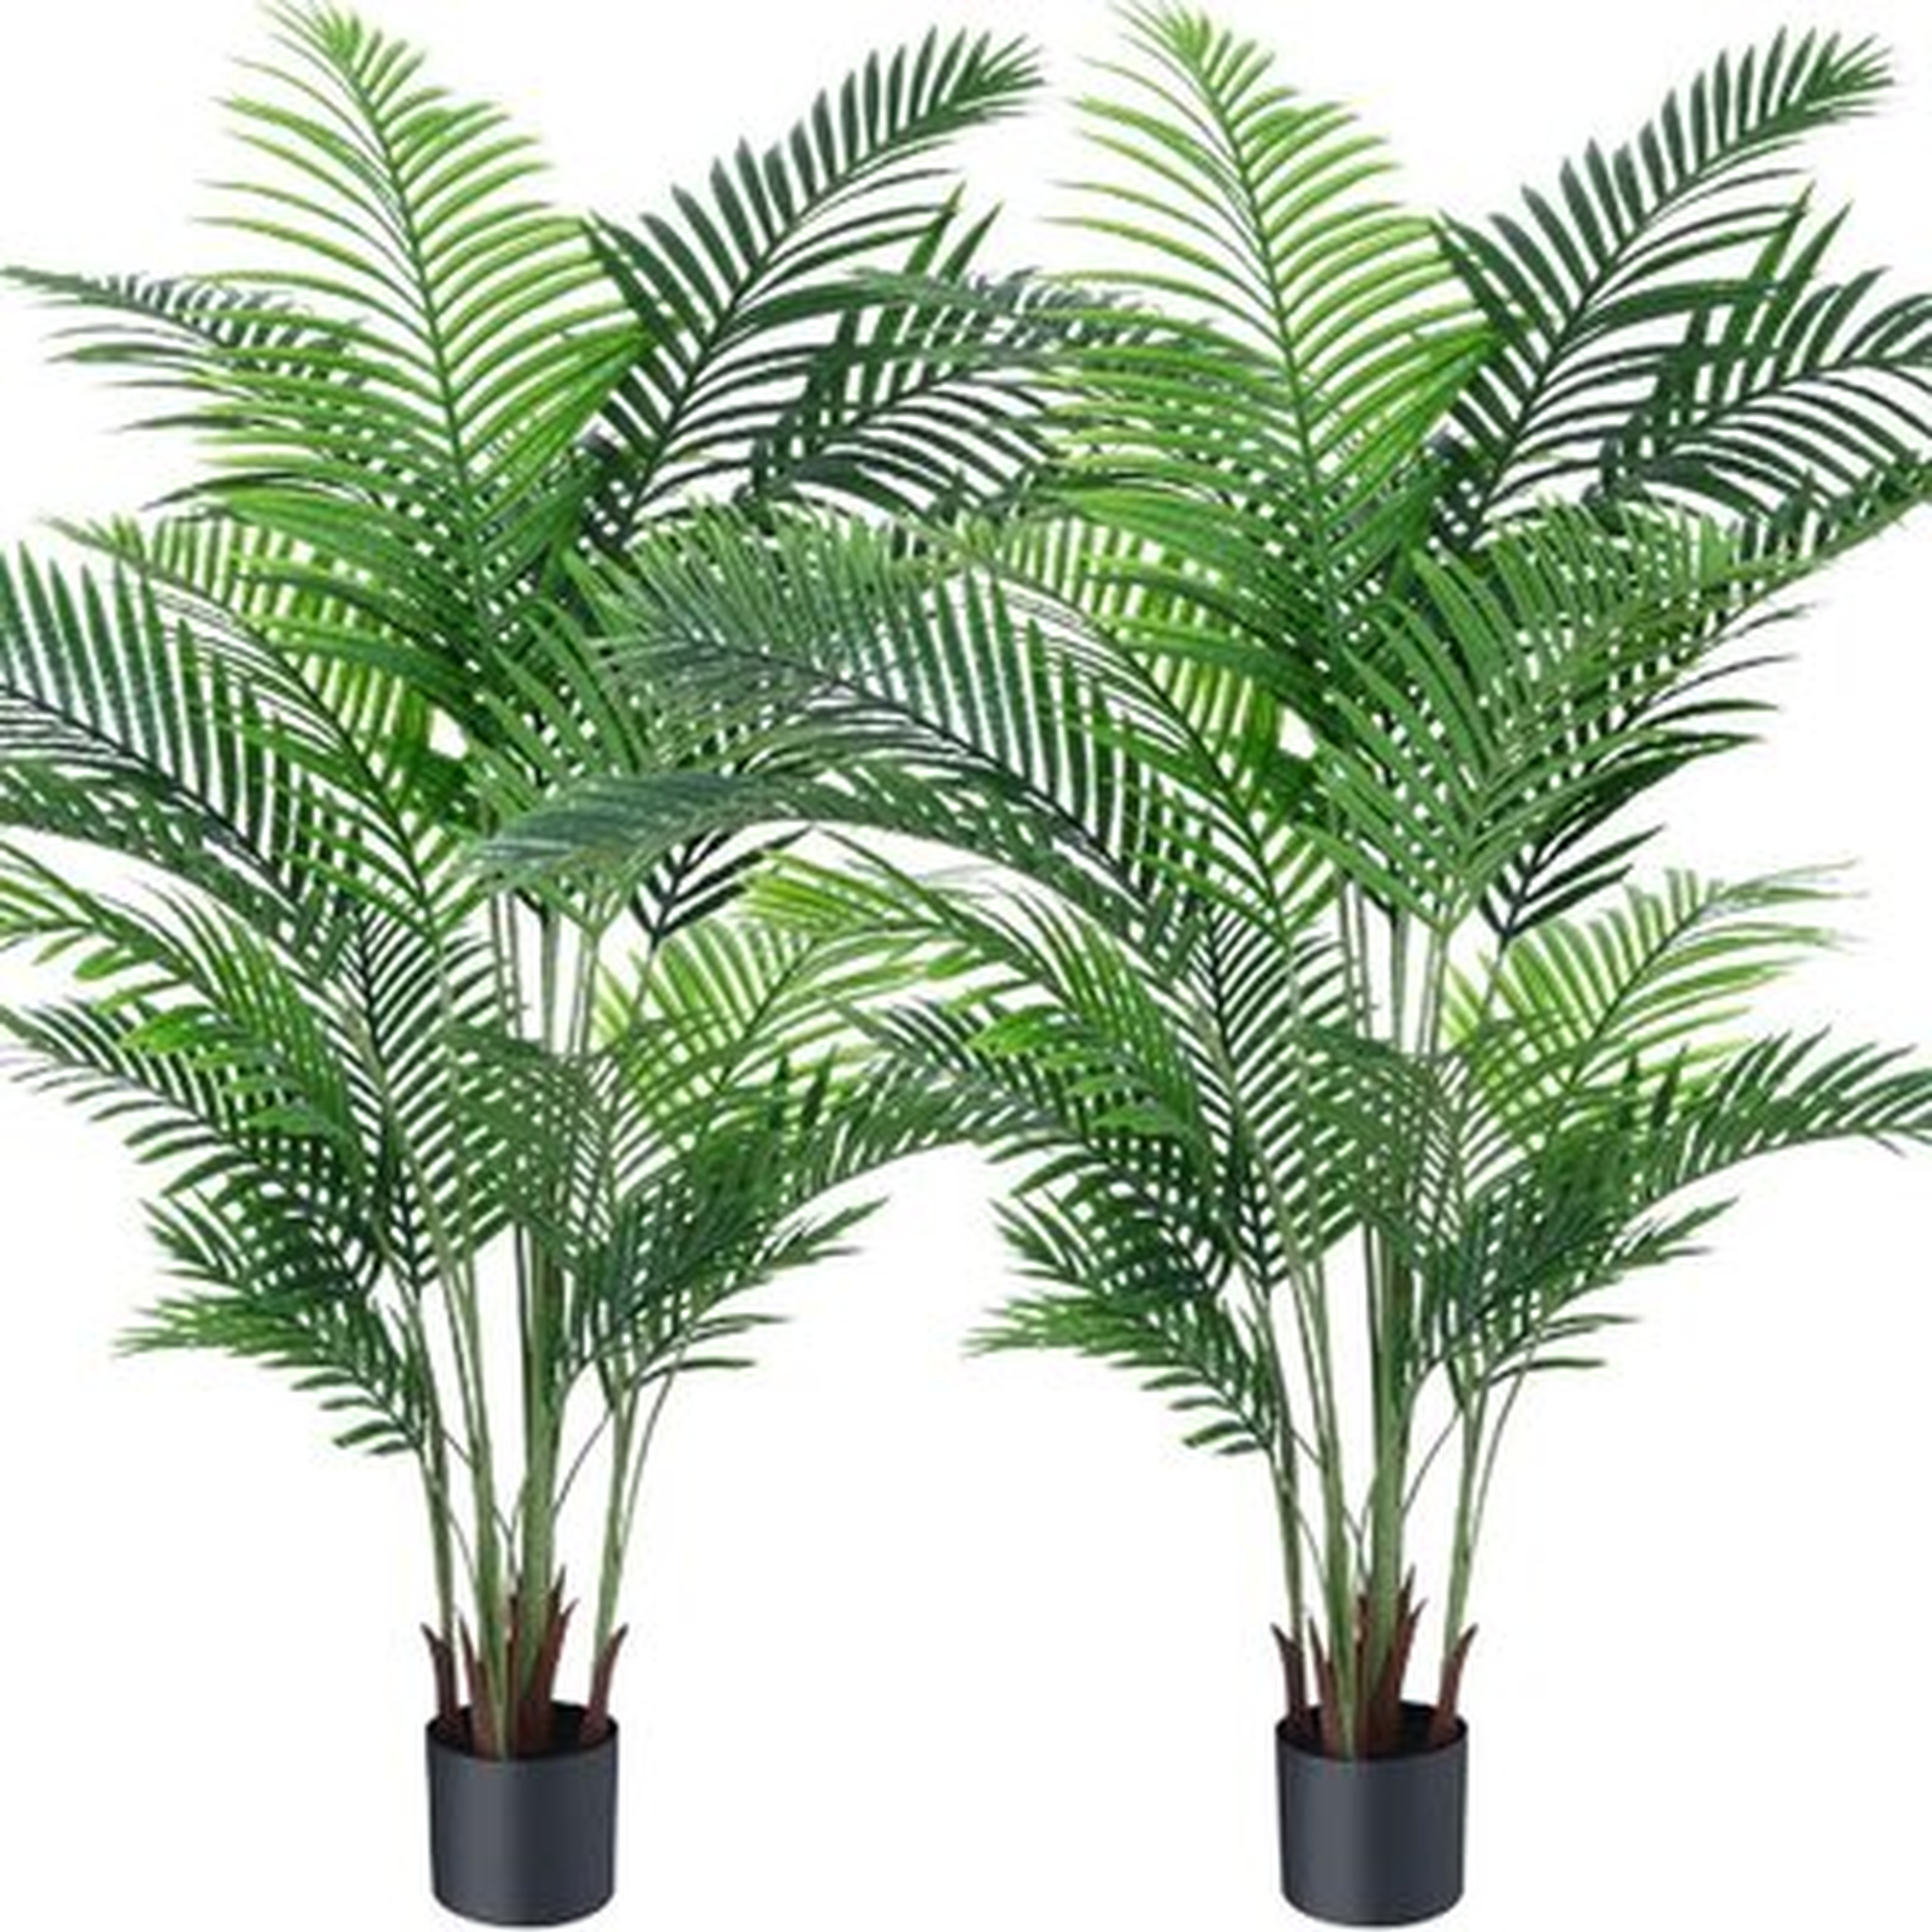 Artificial Areca Palm Plant 6 Feet Fake Palm Tree With 20 Trunks Faux Tree For Indoor Outdoor Modern Decoration Feaux Dypsis Lutescens Plants In Pot For Home Housewarming Gift,2 Pack - Wayfair